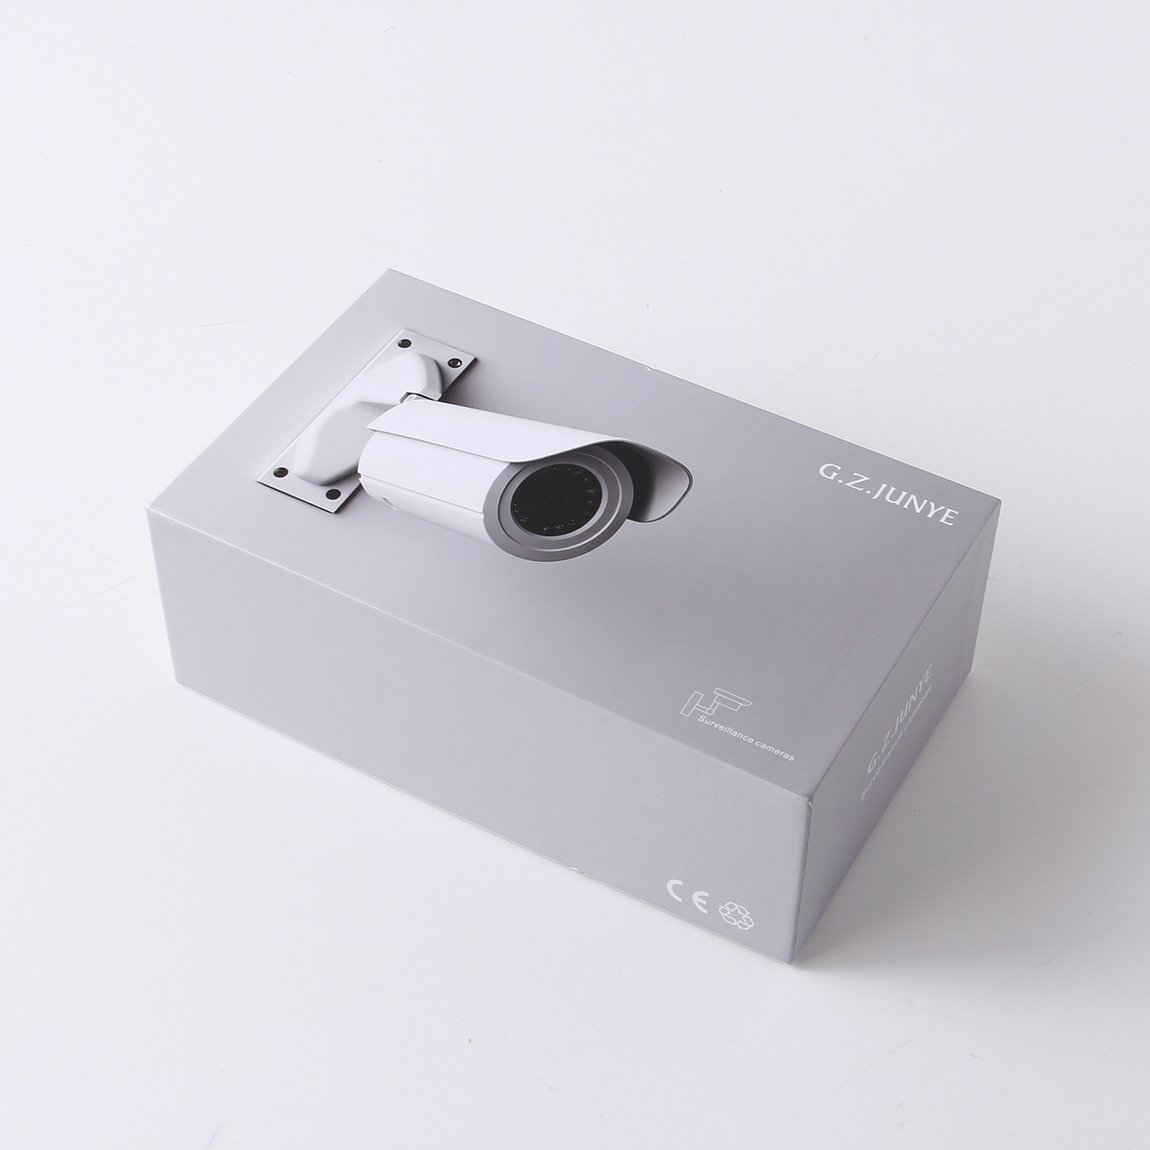 packaging for surveillance cameras